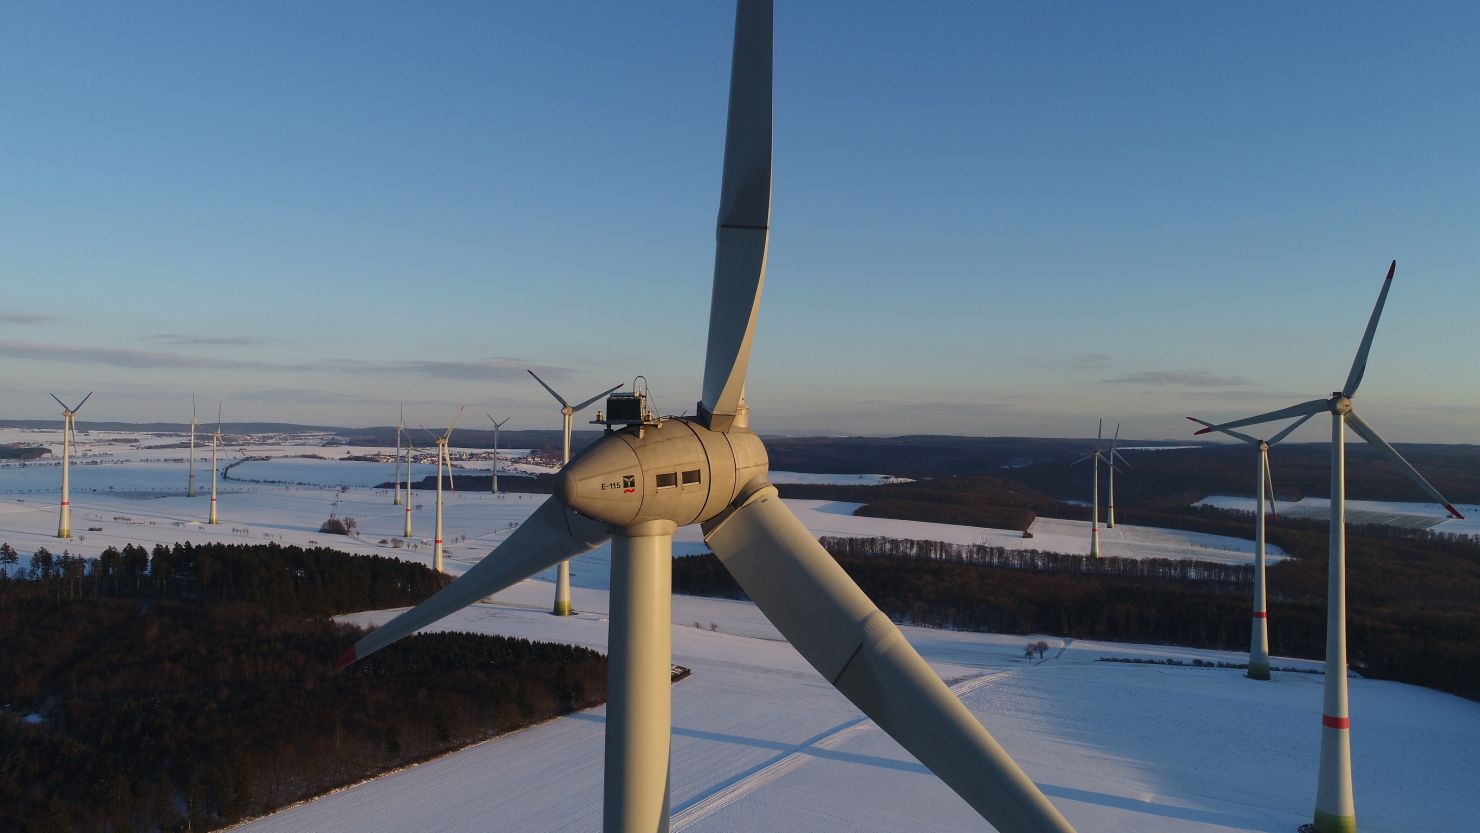 WindCORES cuts emissions by putting data centers inside wind turbines